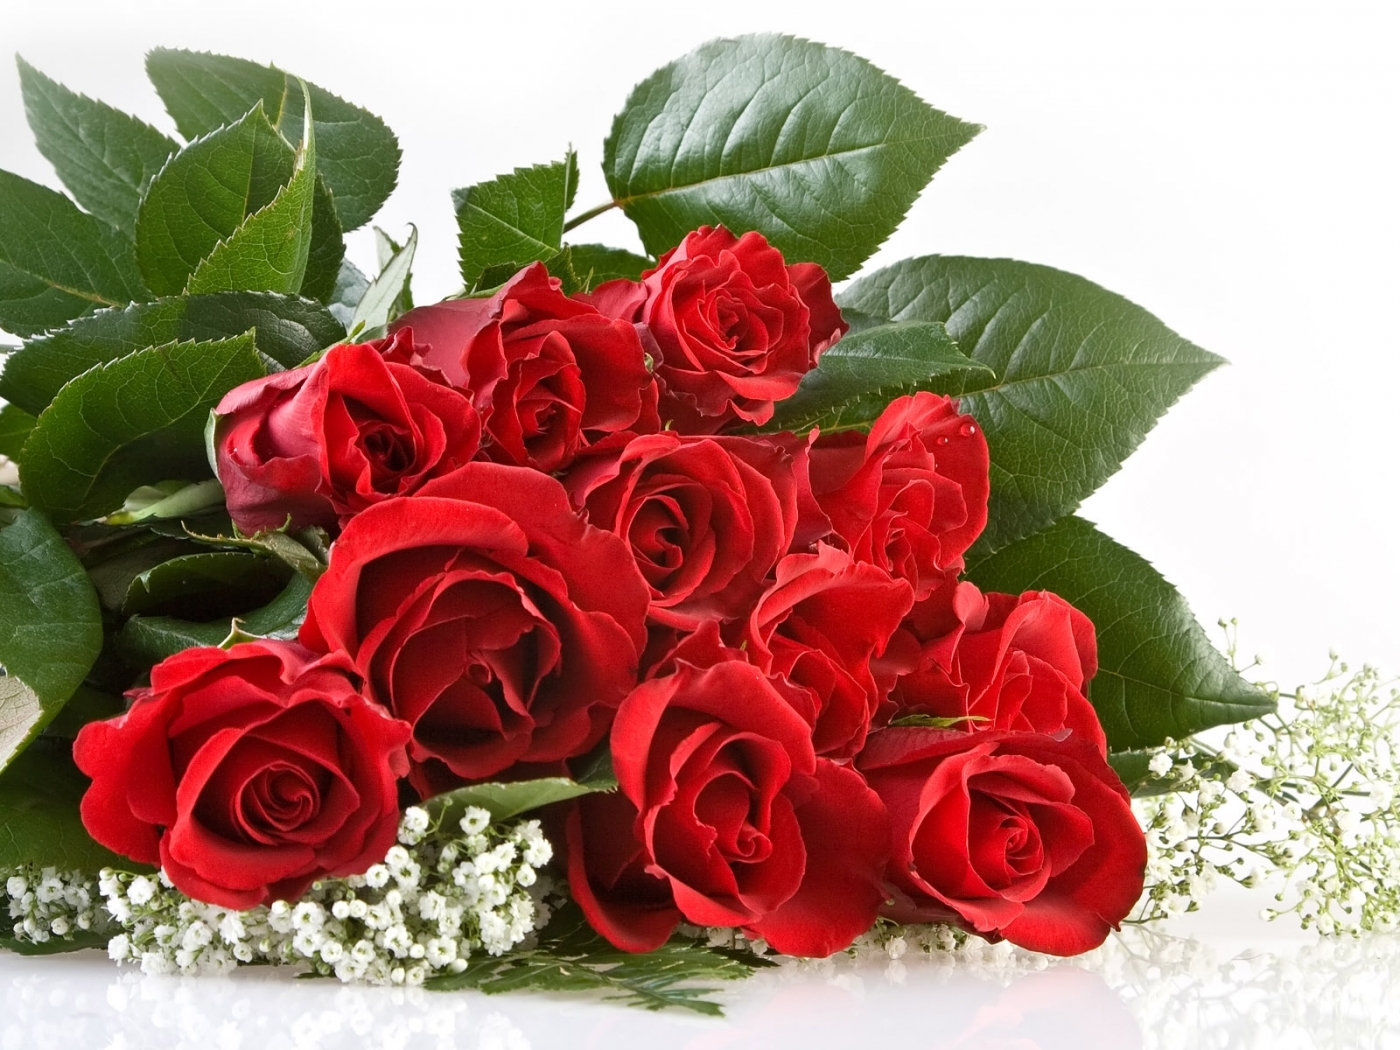 bouquets, roses, plants, flowers, red QHD